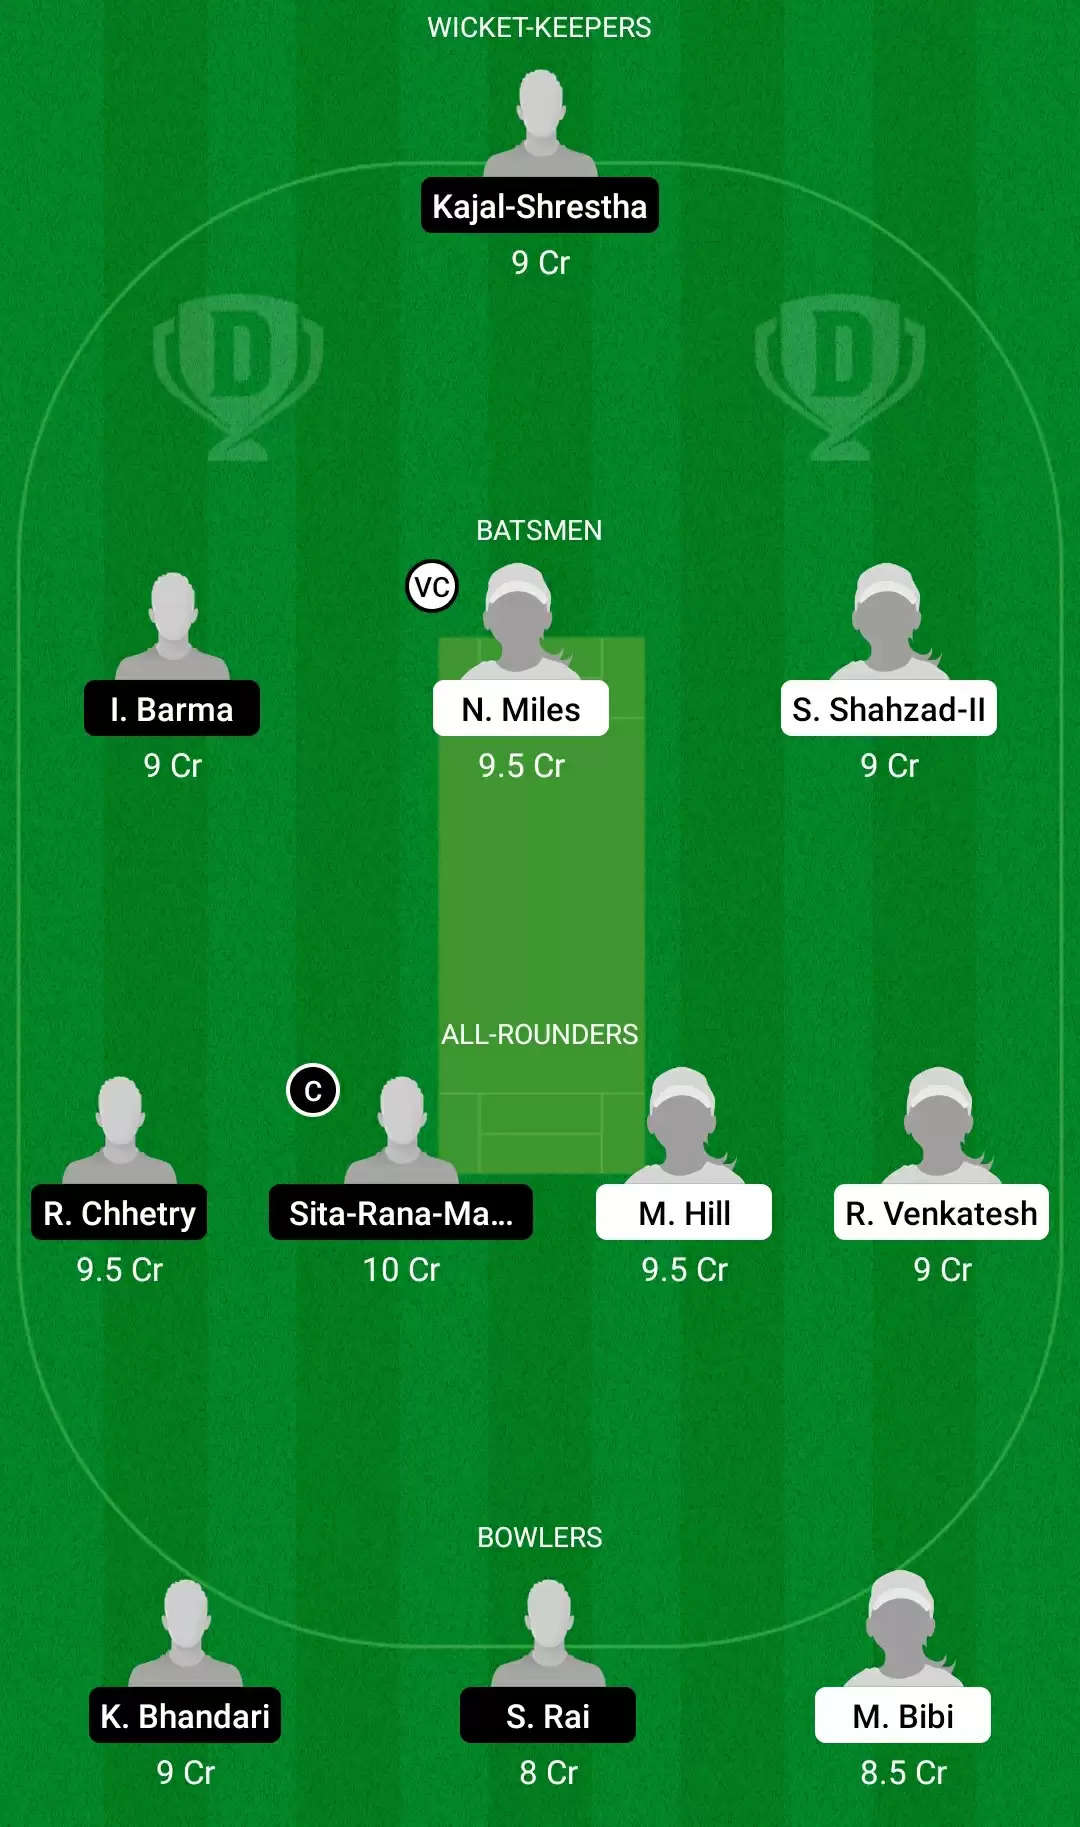 HK-W vs NP-W Dream11 Prediction for ICC Women’s T20 World Cup Asia qualifier: Playing XI, Fantasy Cricket Tips, Team, Weather Updates and Pitch Report